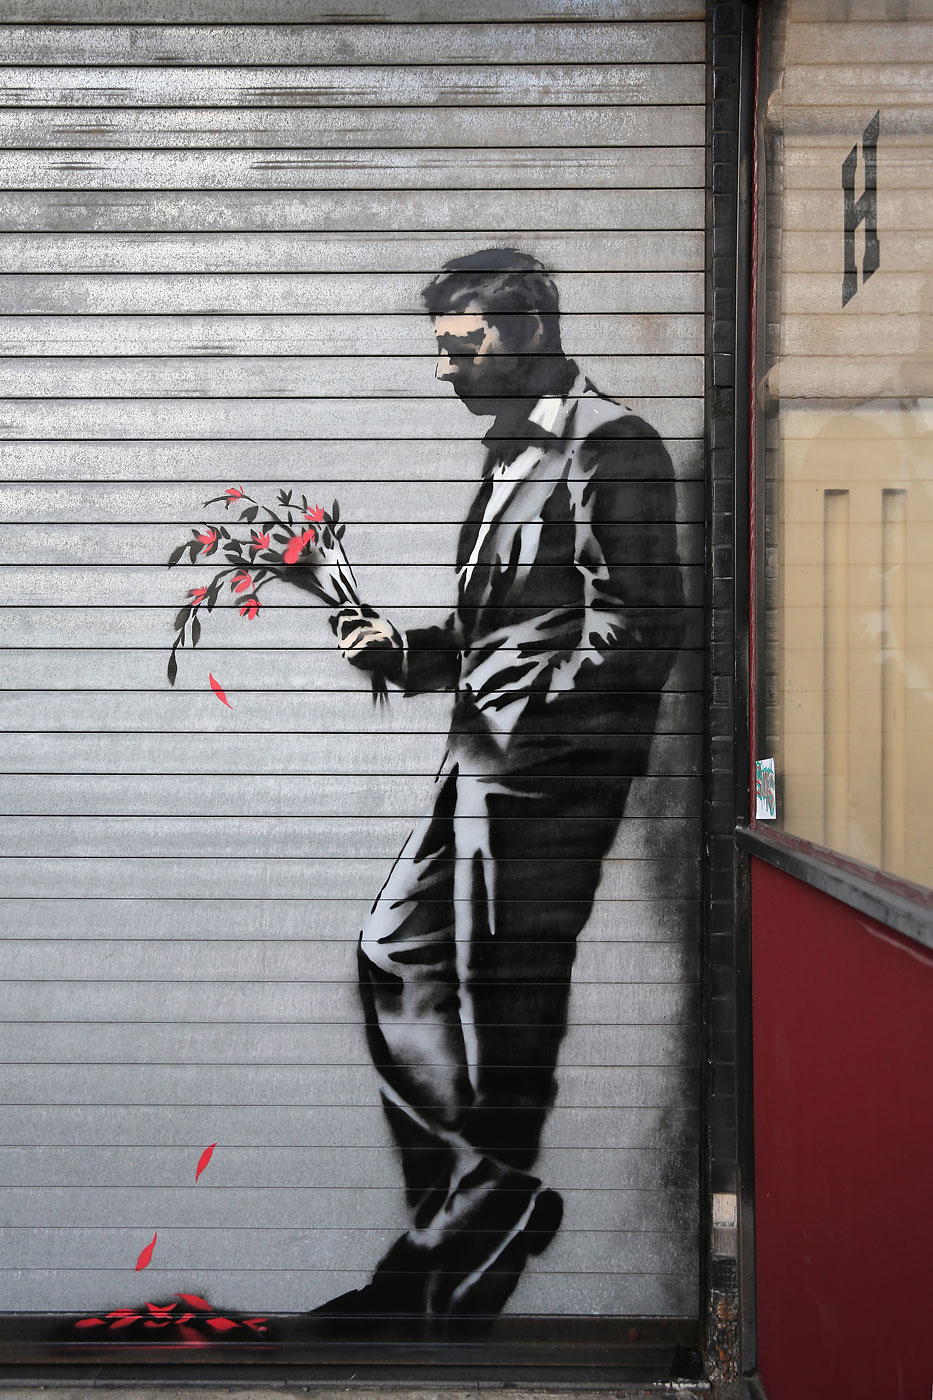 British Street Artist Banksy Continues His Month-Long New York City Residency